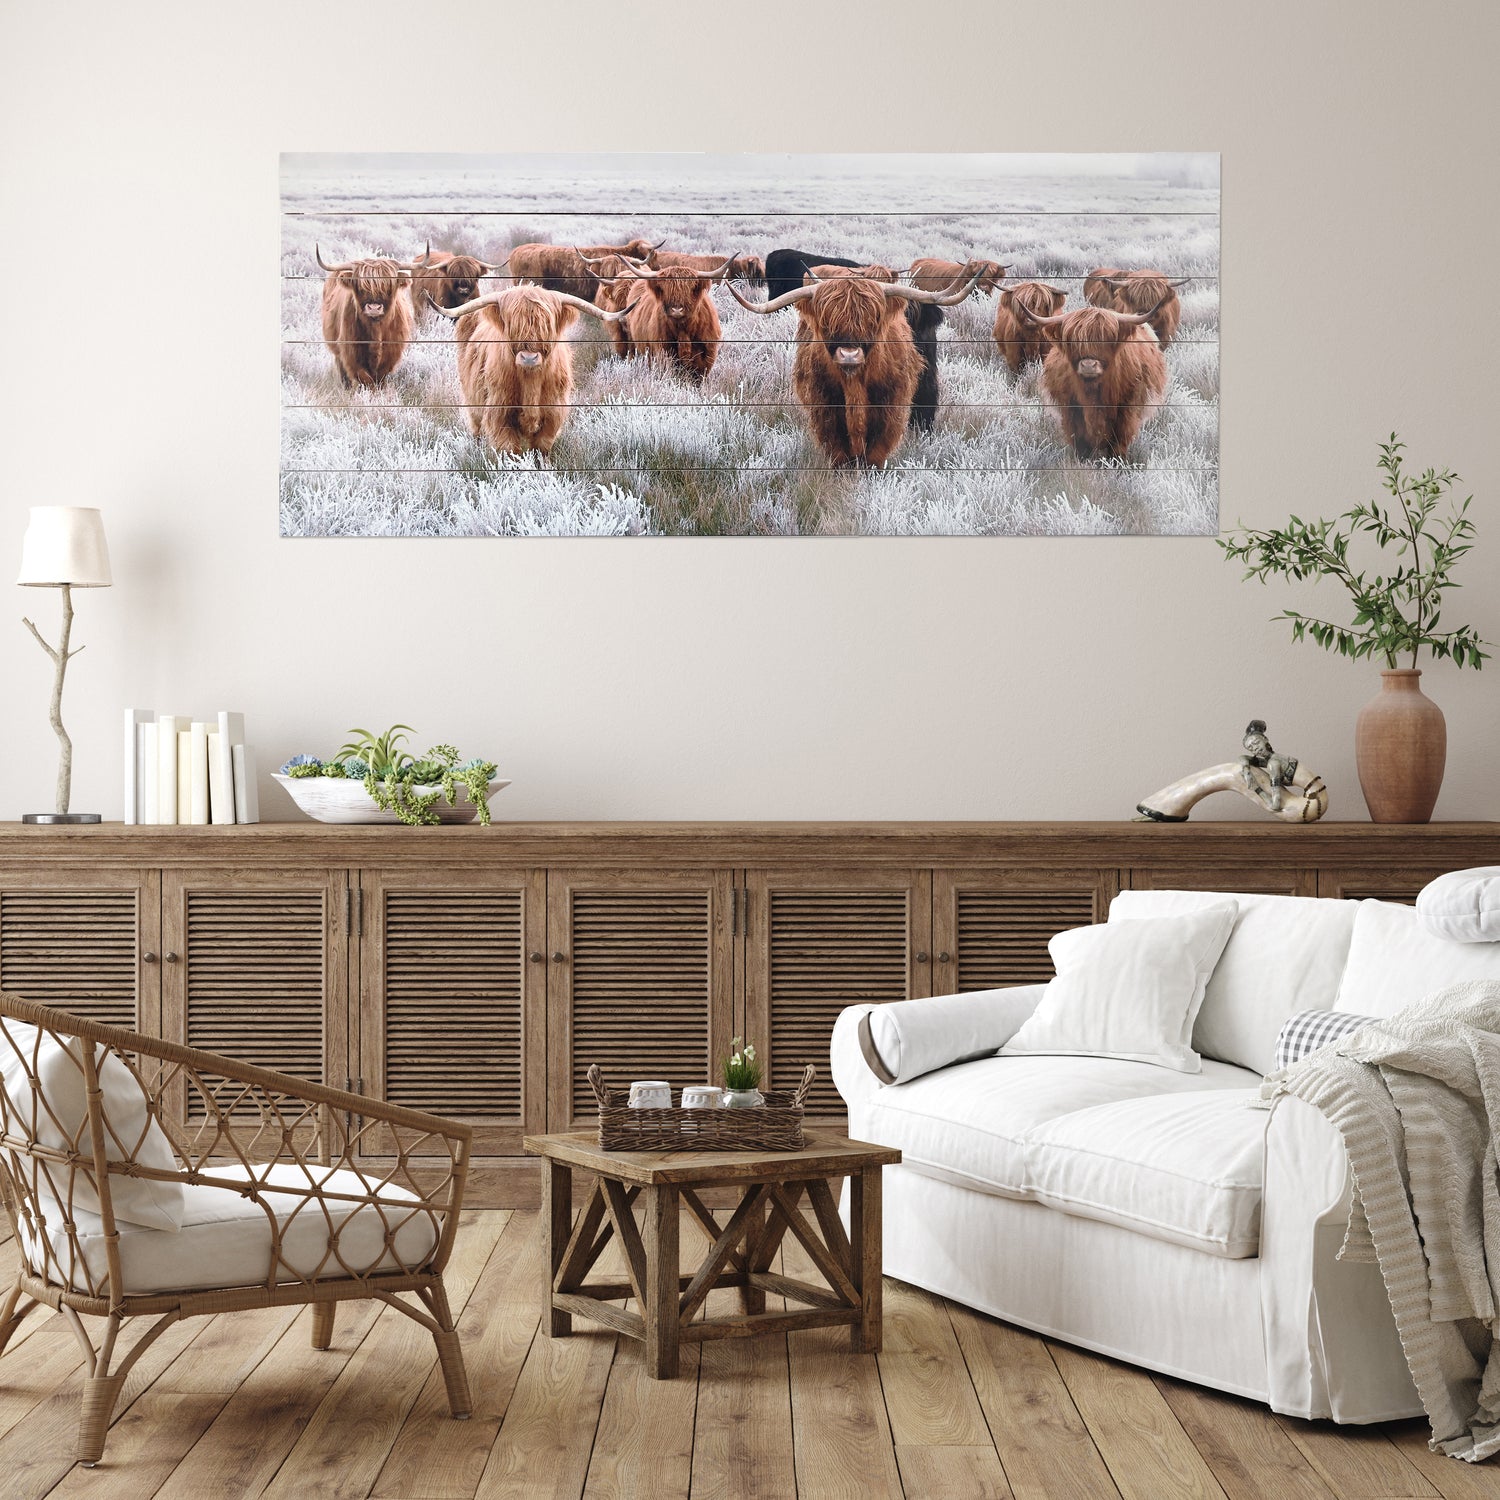 Gallery 57 Staring Cow 24x36 Wood Framed Canvas Wall Art - On Sale